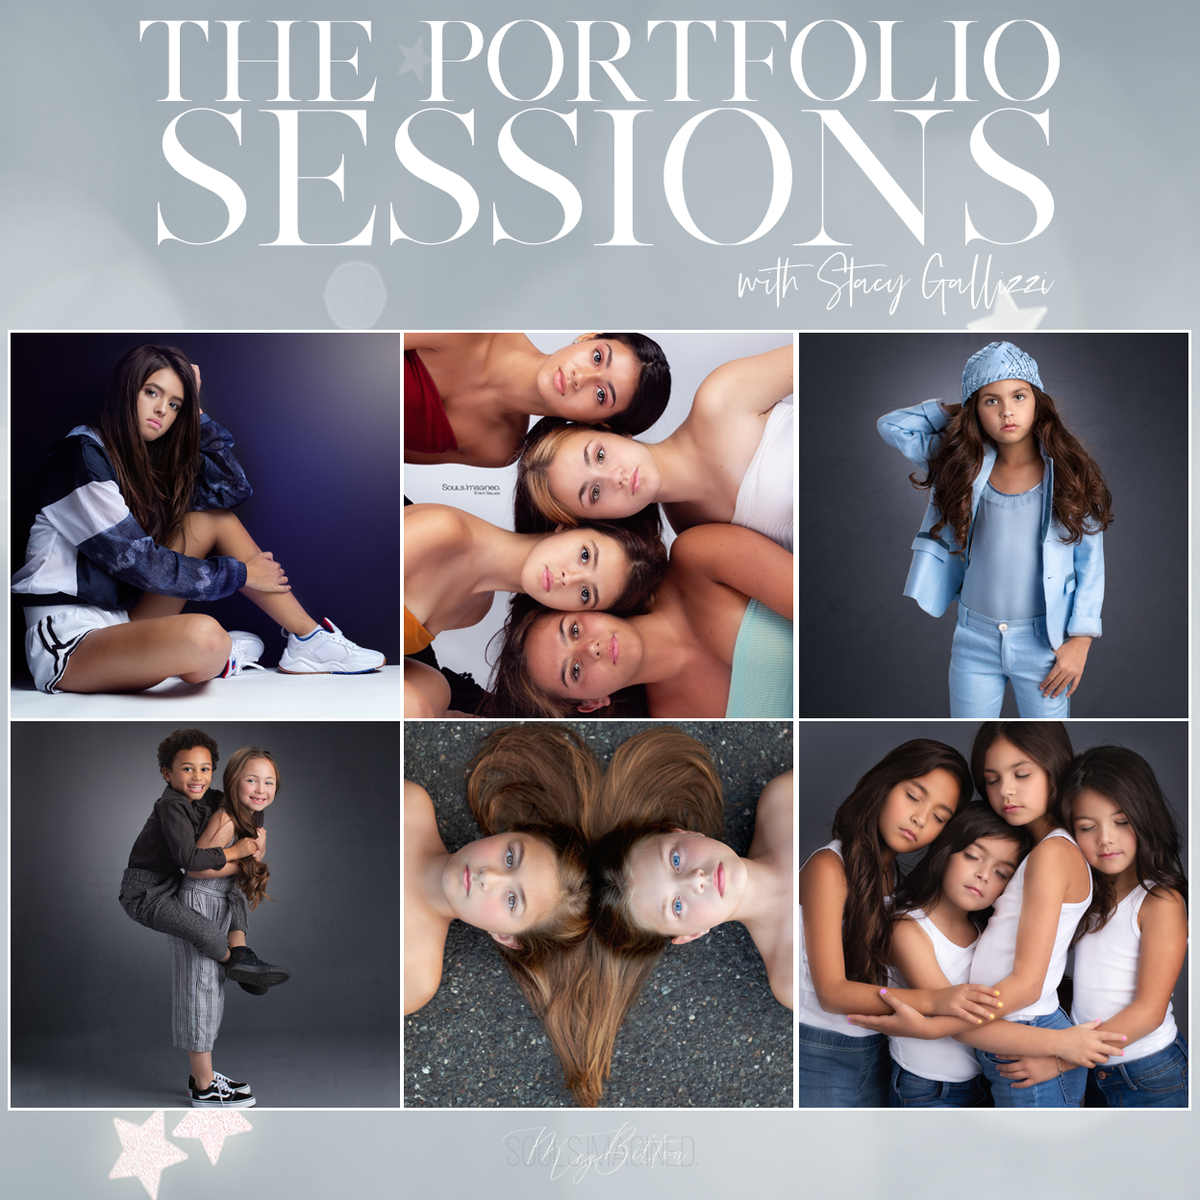 Editorial sessions with Stacy Gallizzi - Meg Bitton Productions